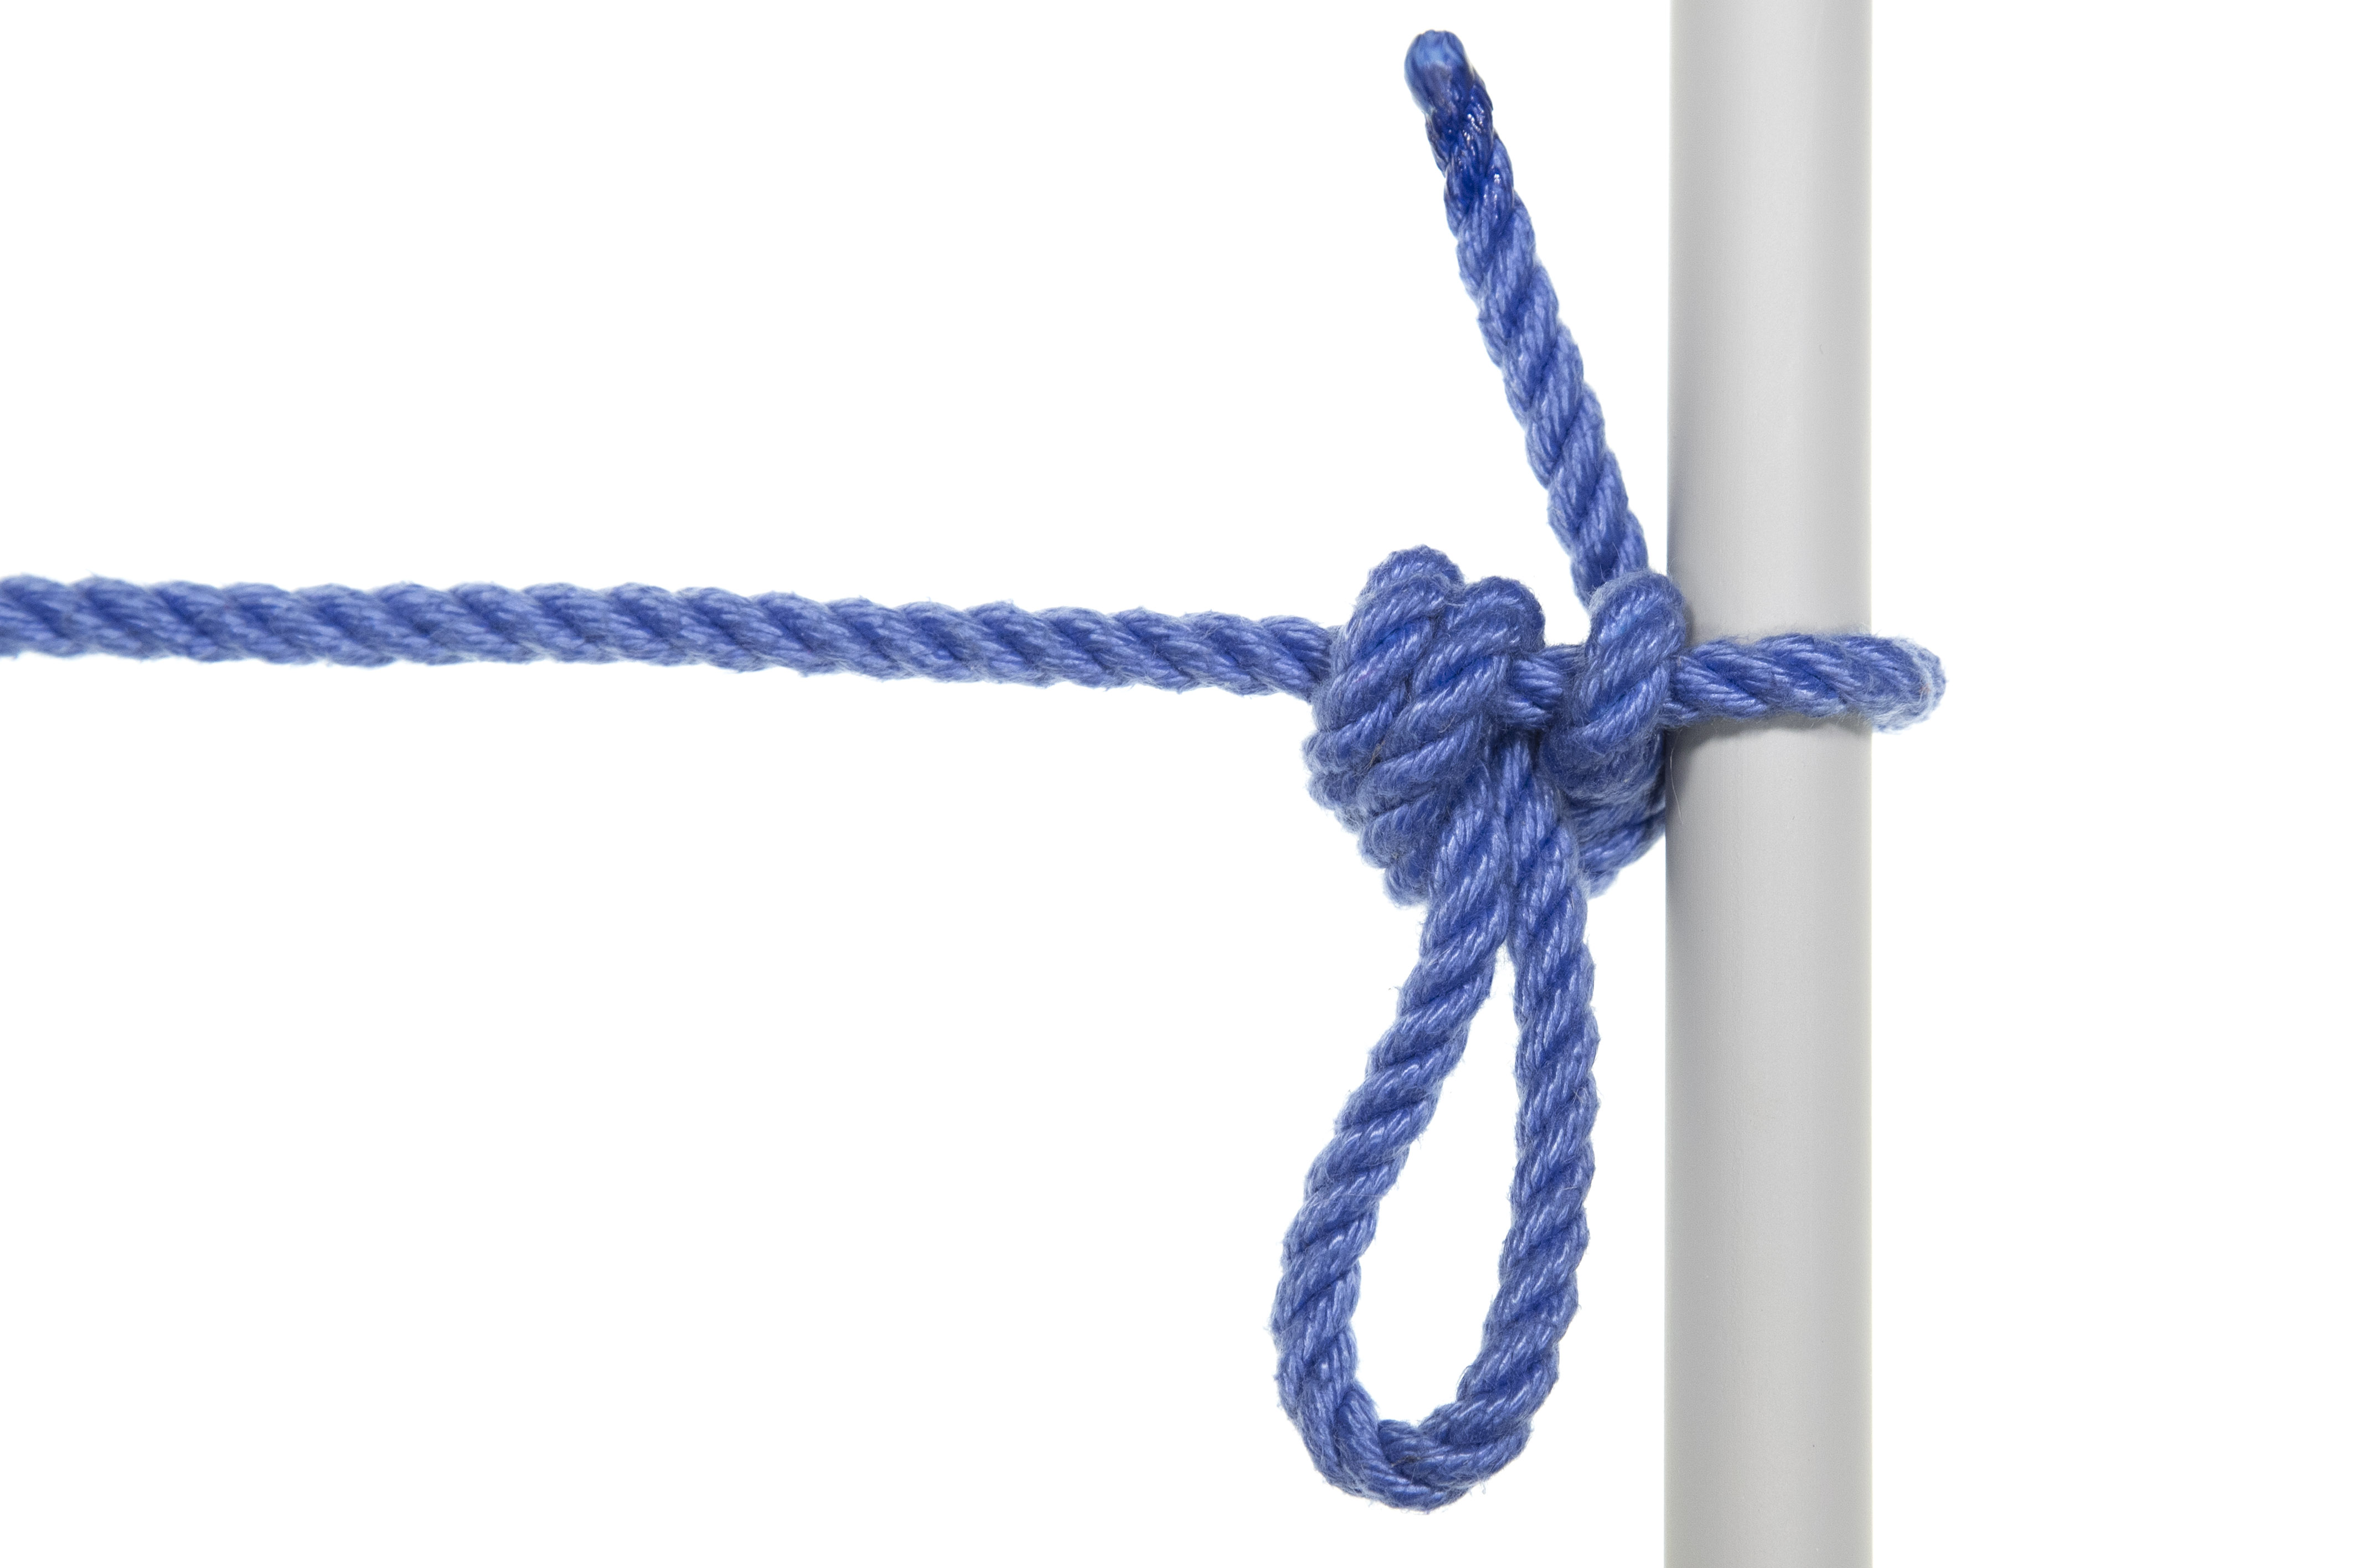 A one inch diameter gray pole crosses the frame vertically. A single blue rope enters from the left and is tied to the pole using a slipped from of two half hitches. The tail of the rope exits the top of the knot next to the pole, and a four inch bight of rope exits the bottom of the knot in the middle.